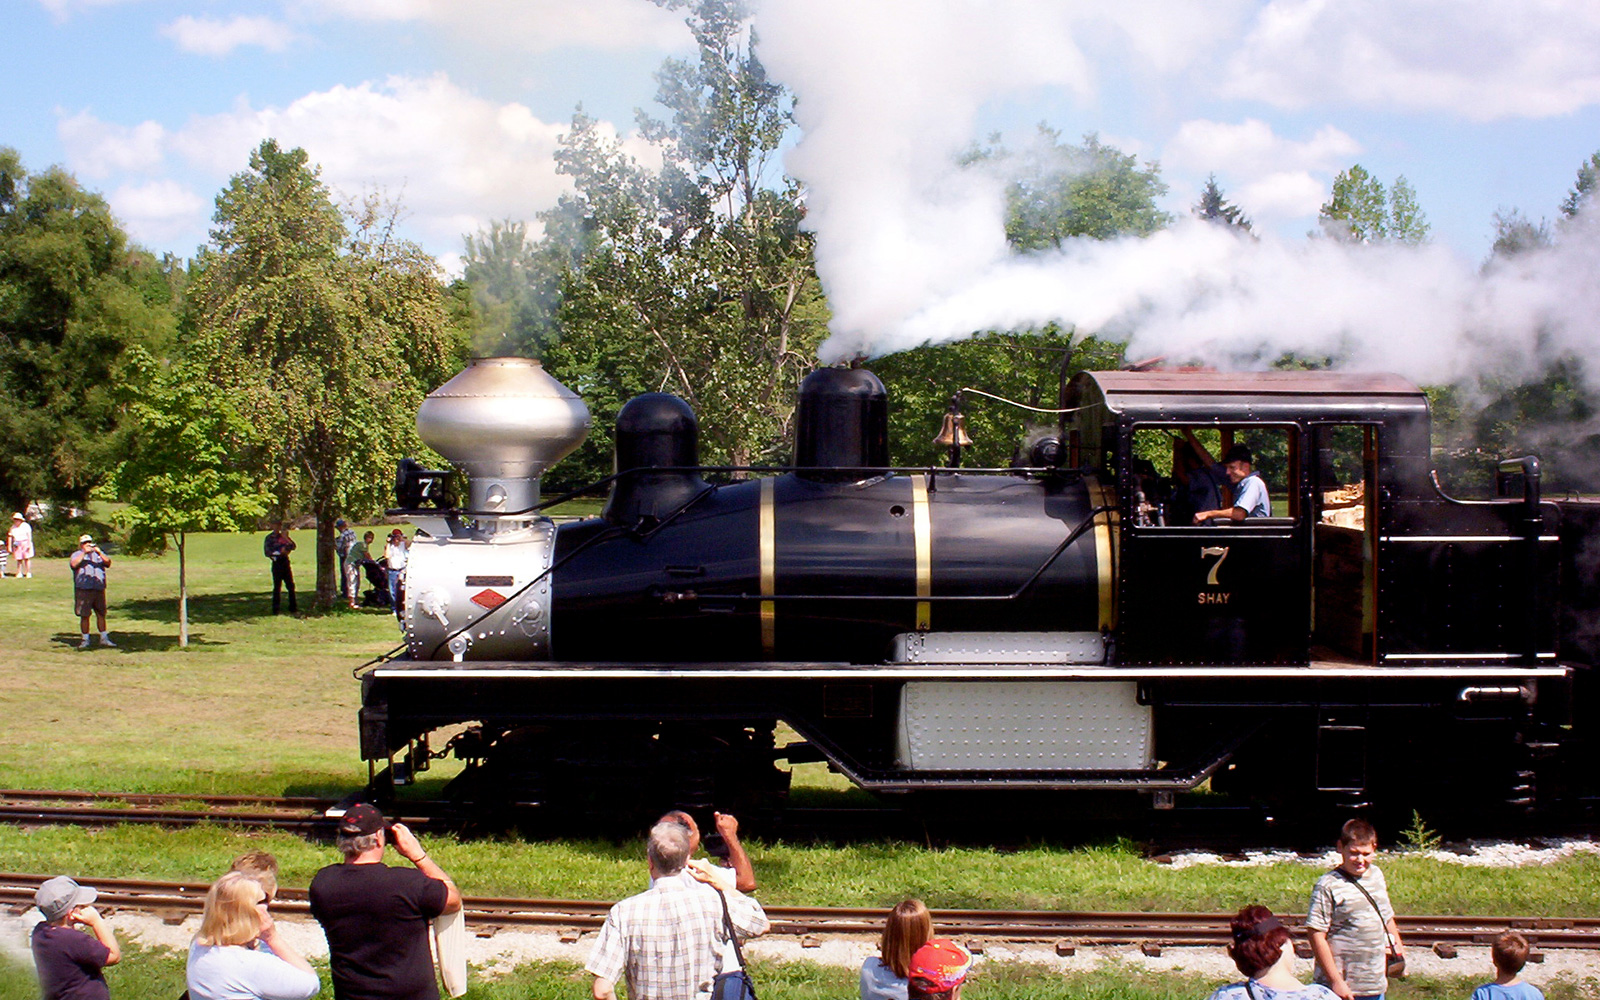 people gather to see a classic steam engine train at Hesston